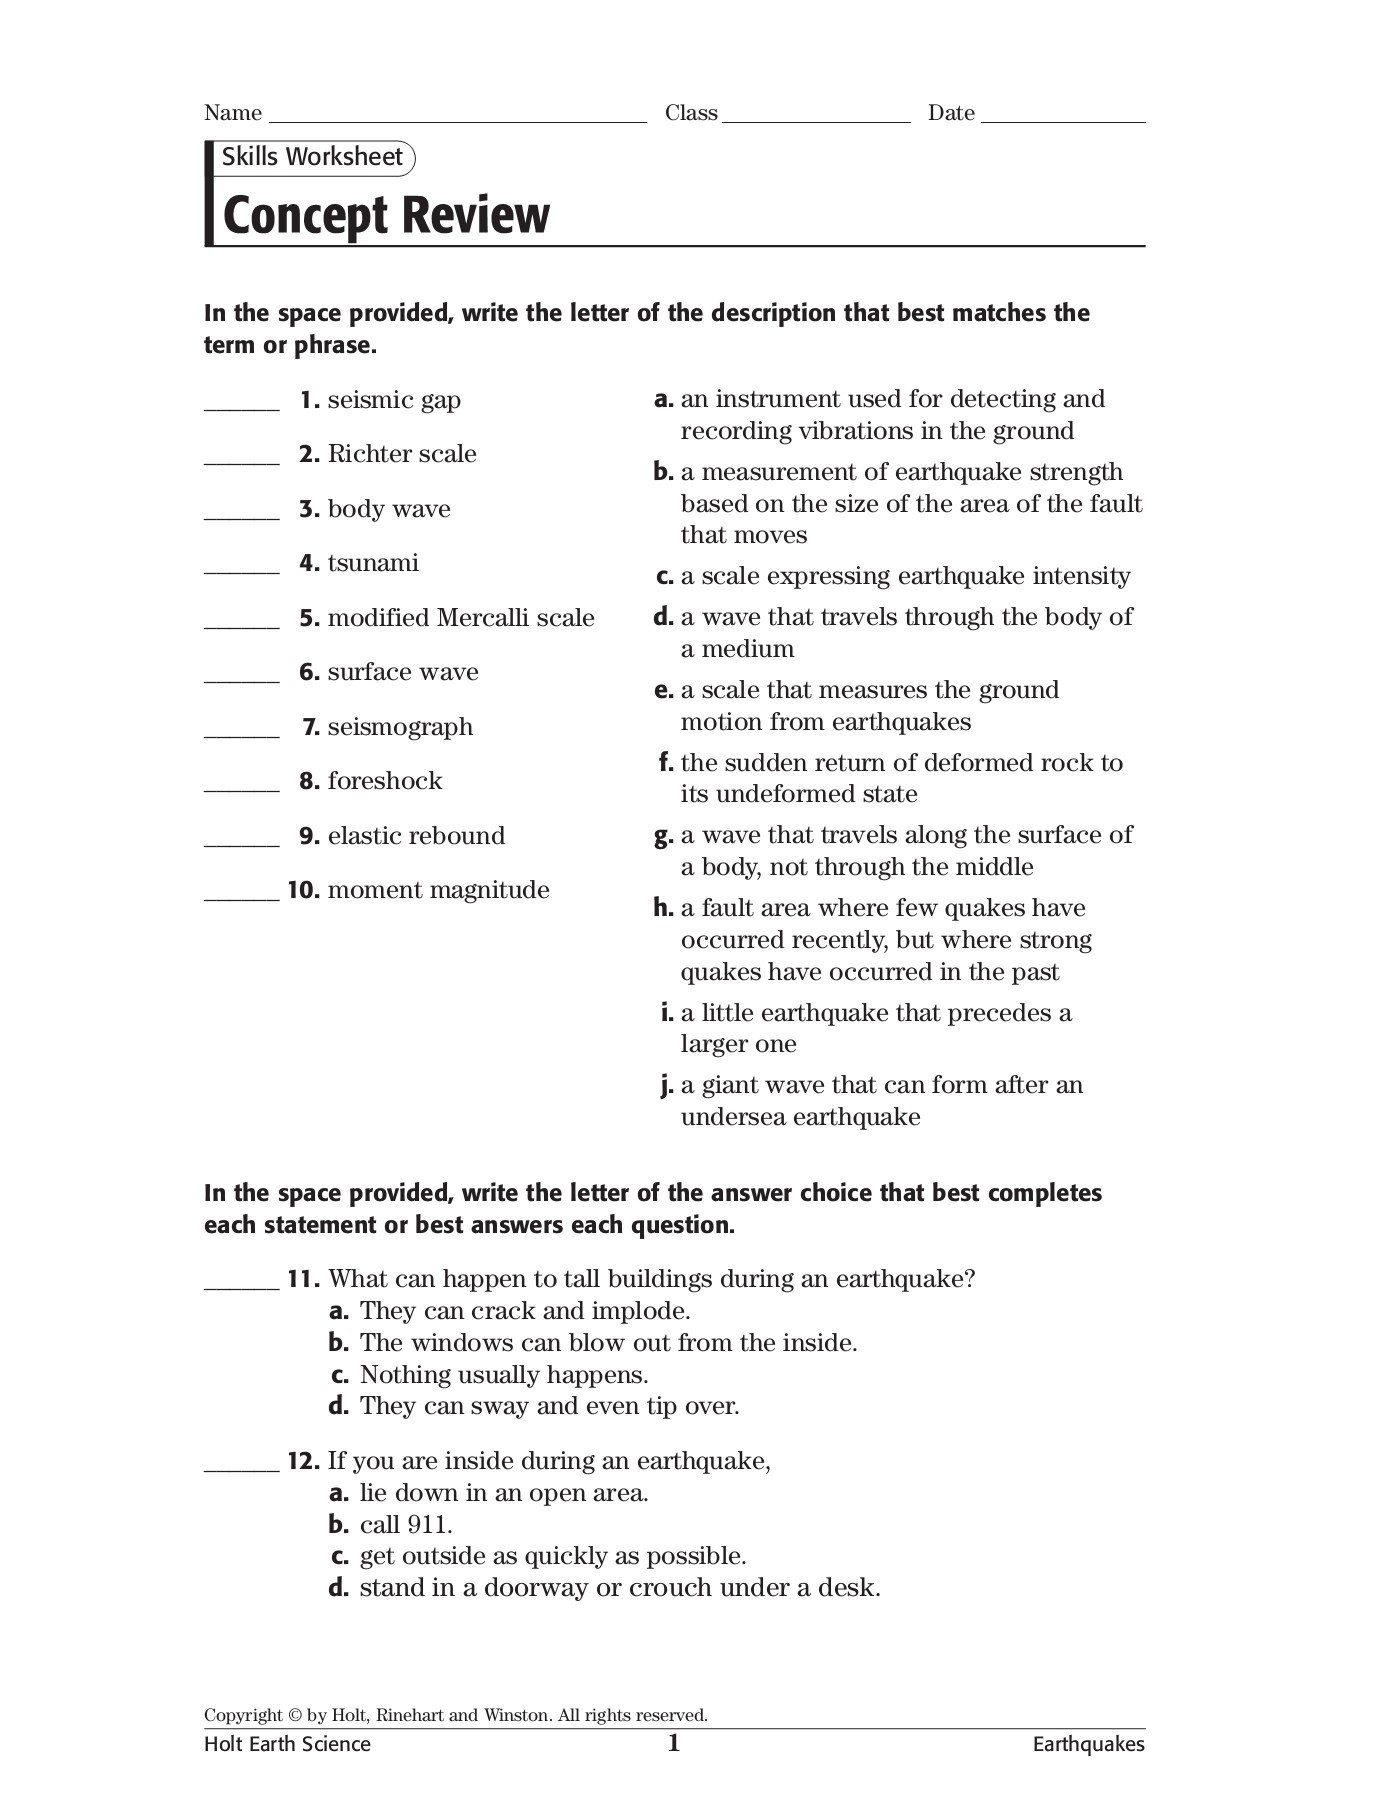 Wave Review Worksheet Answer Key Skills Worksheet Concept Review Pages 1 3 Text Version